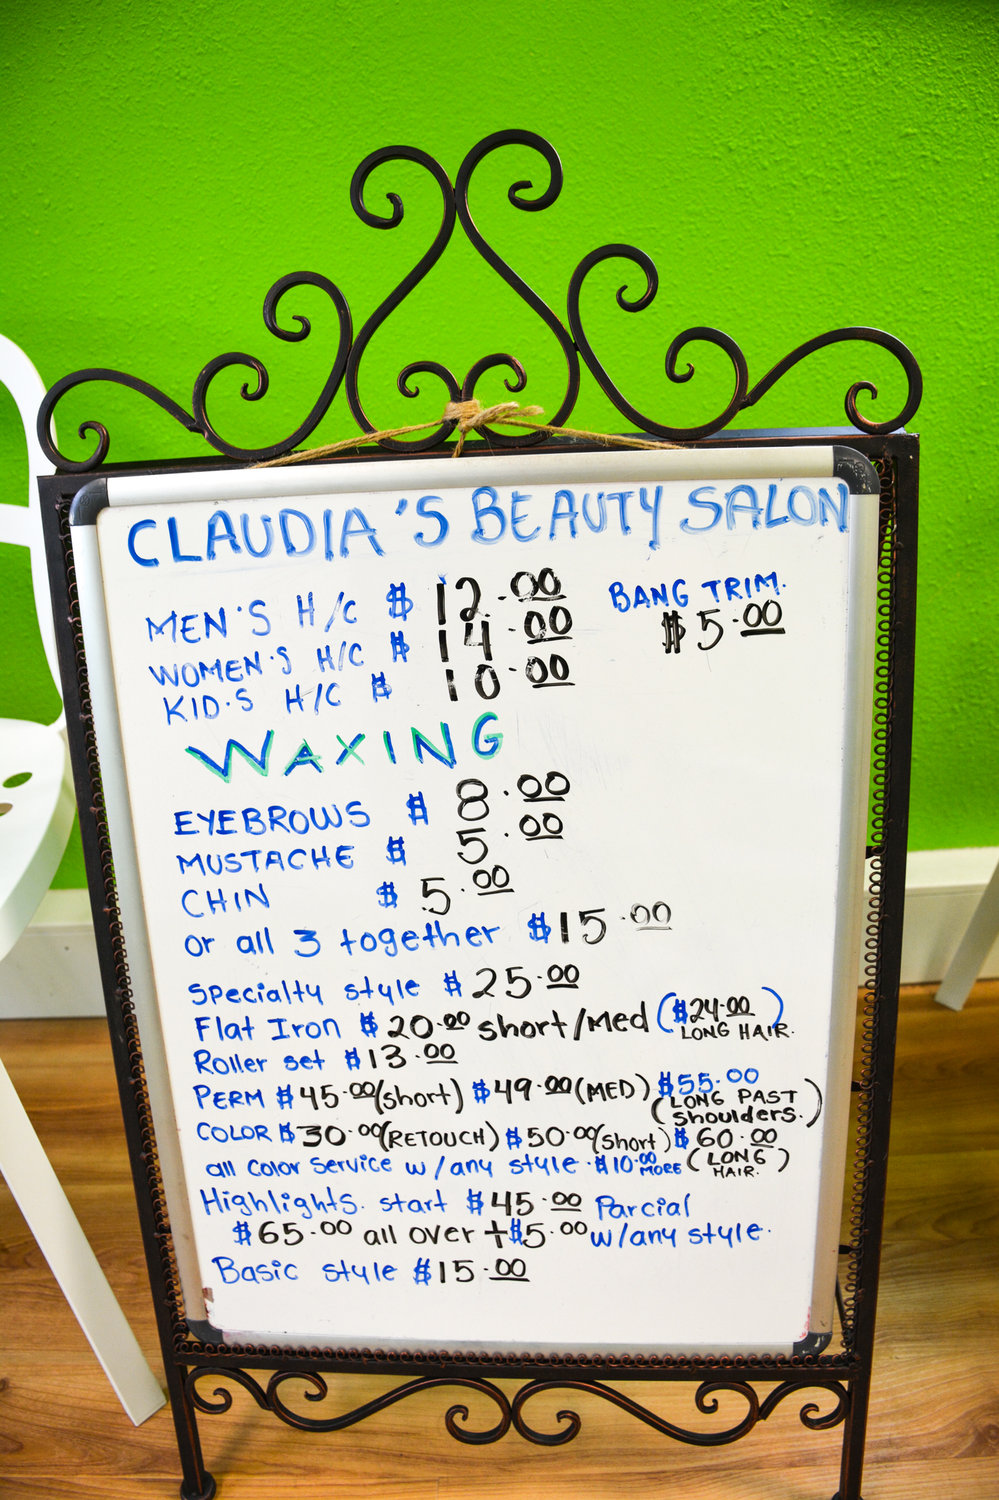 THE NEW CLAUDIA’S Beauty Salon in La Center, offers reasonable prices for men’s, women’s and children’s haircuts. The salon is open from 9 a.m. to 8 p.m., Tuesday through Sunday. Walk-ins are welcome, but appointments are preferred.